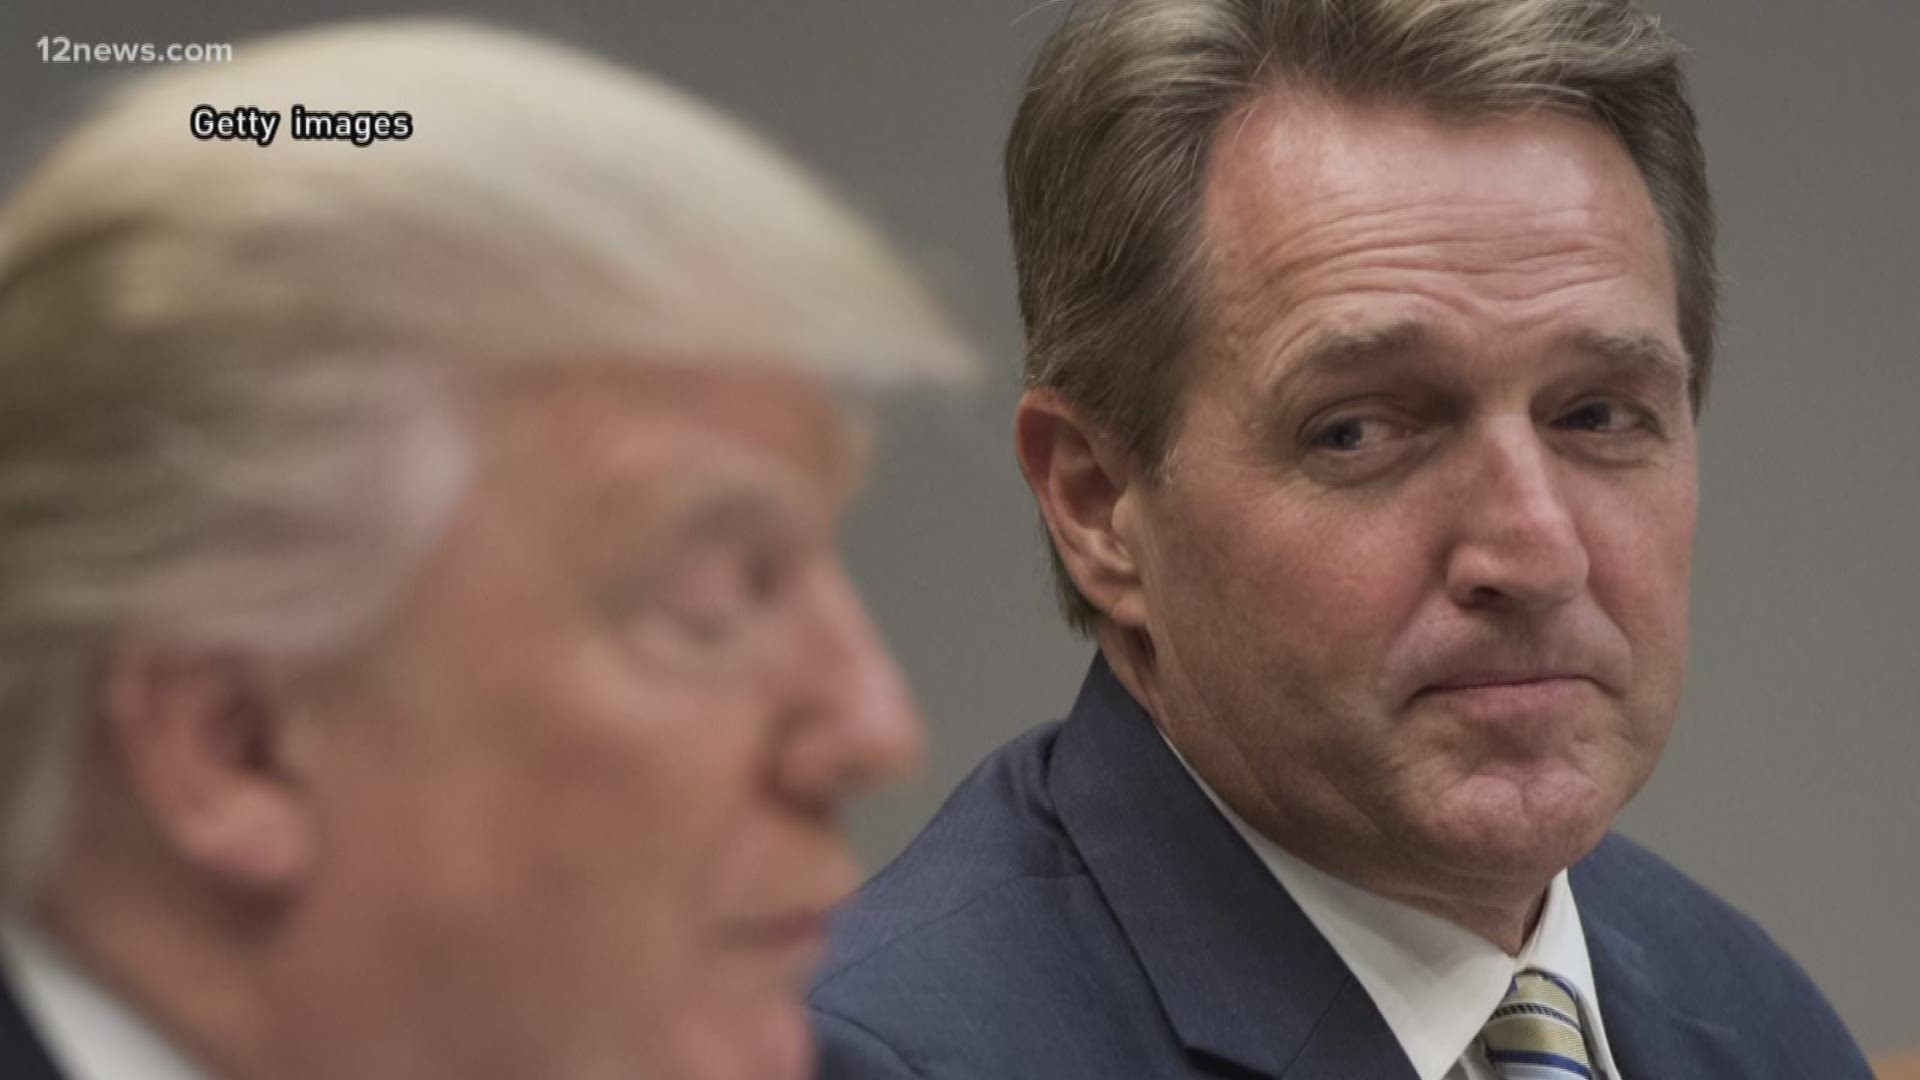 Sen. Flake's lashed out at President Trump's rhetoric false claims during a recent speech at the Capitol.